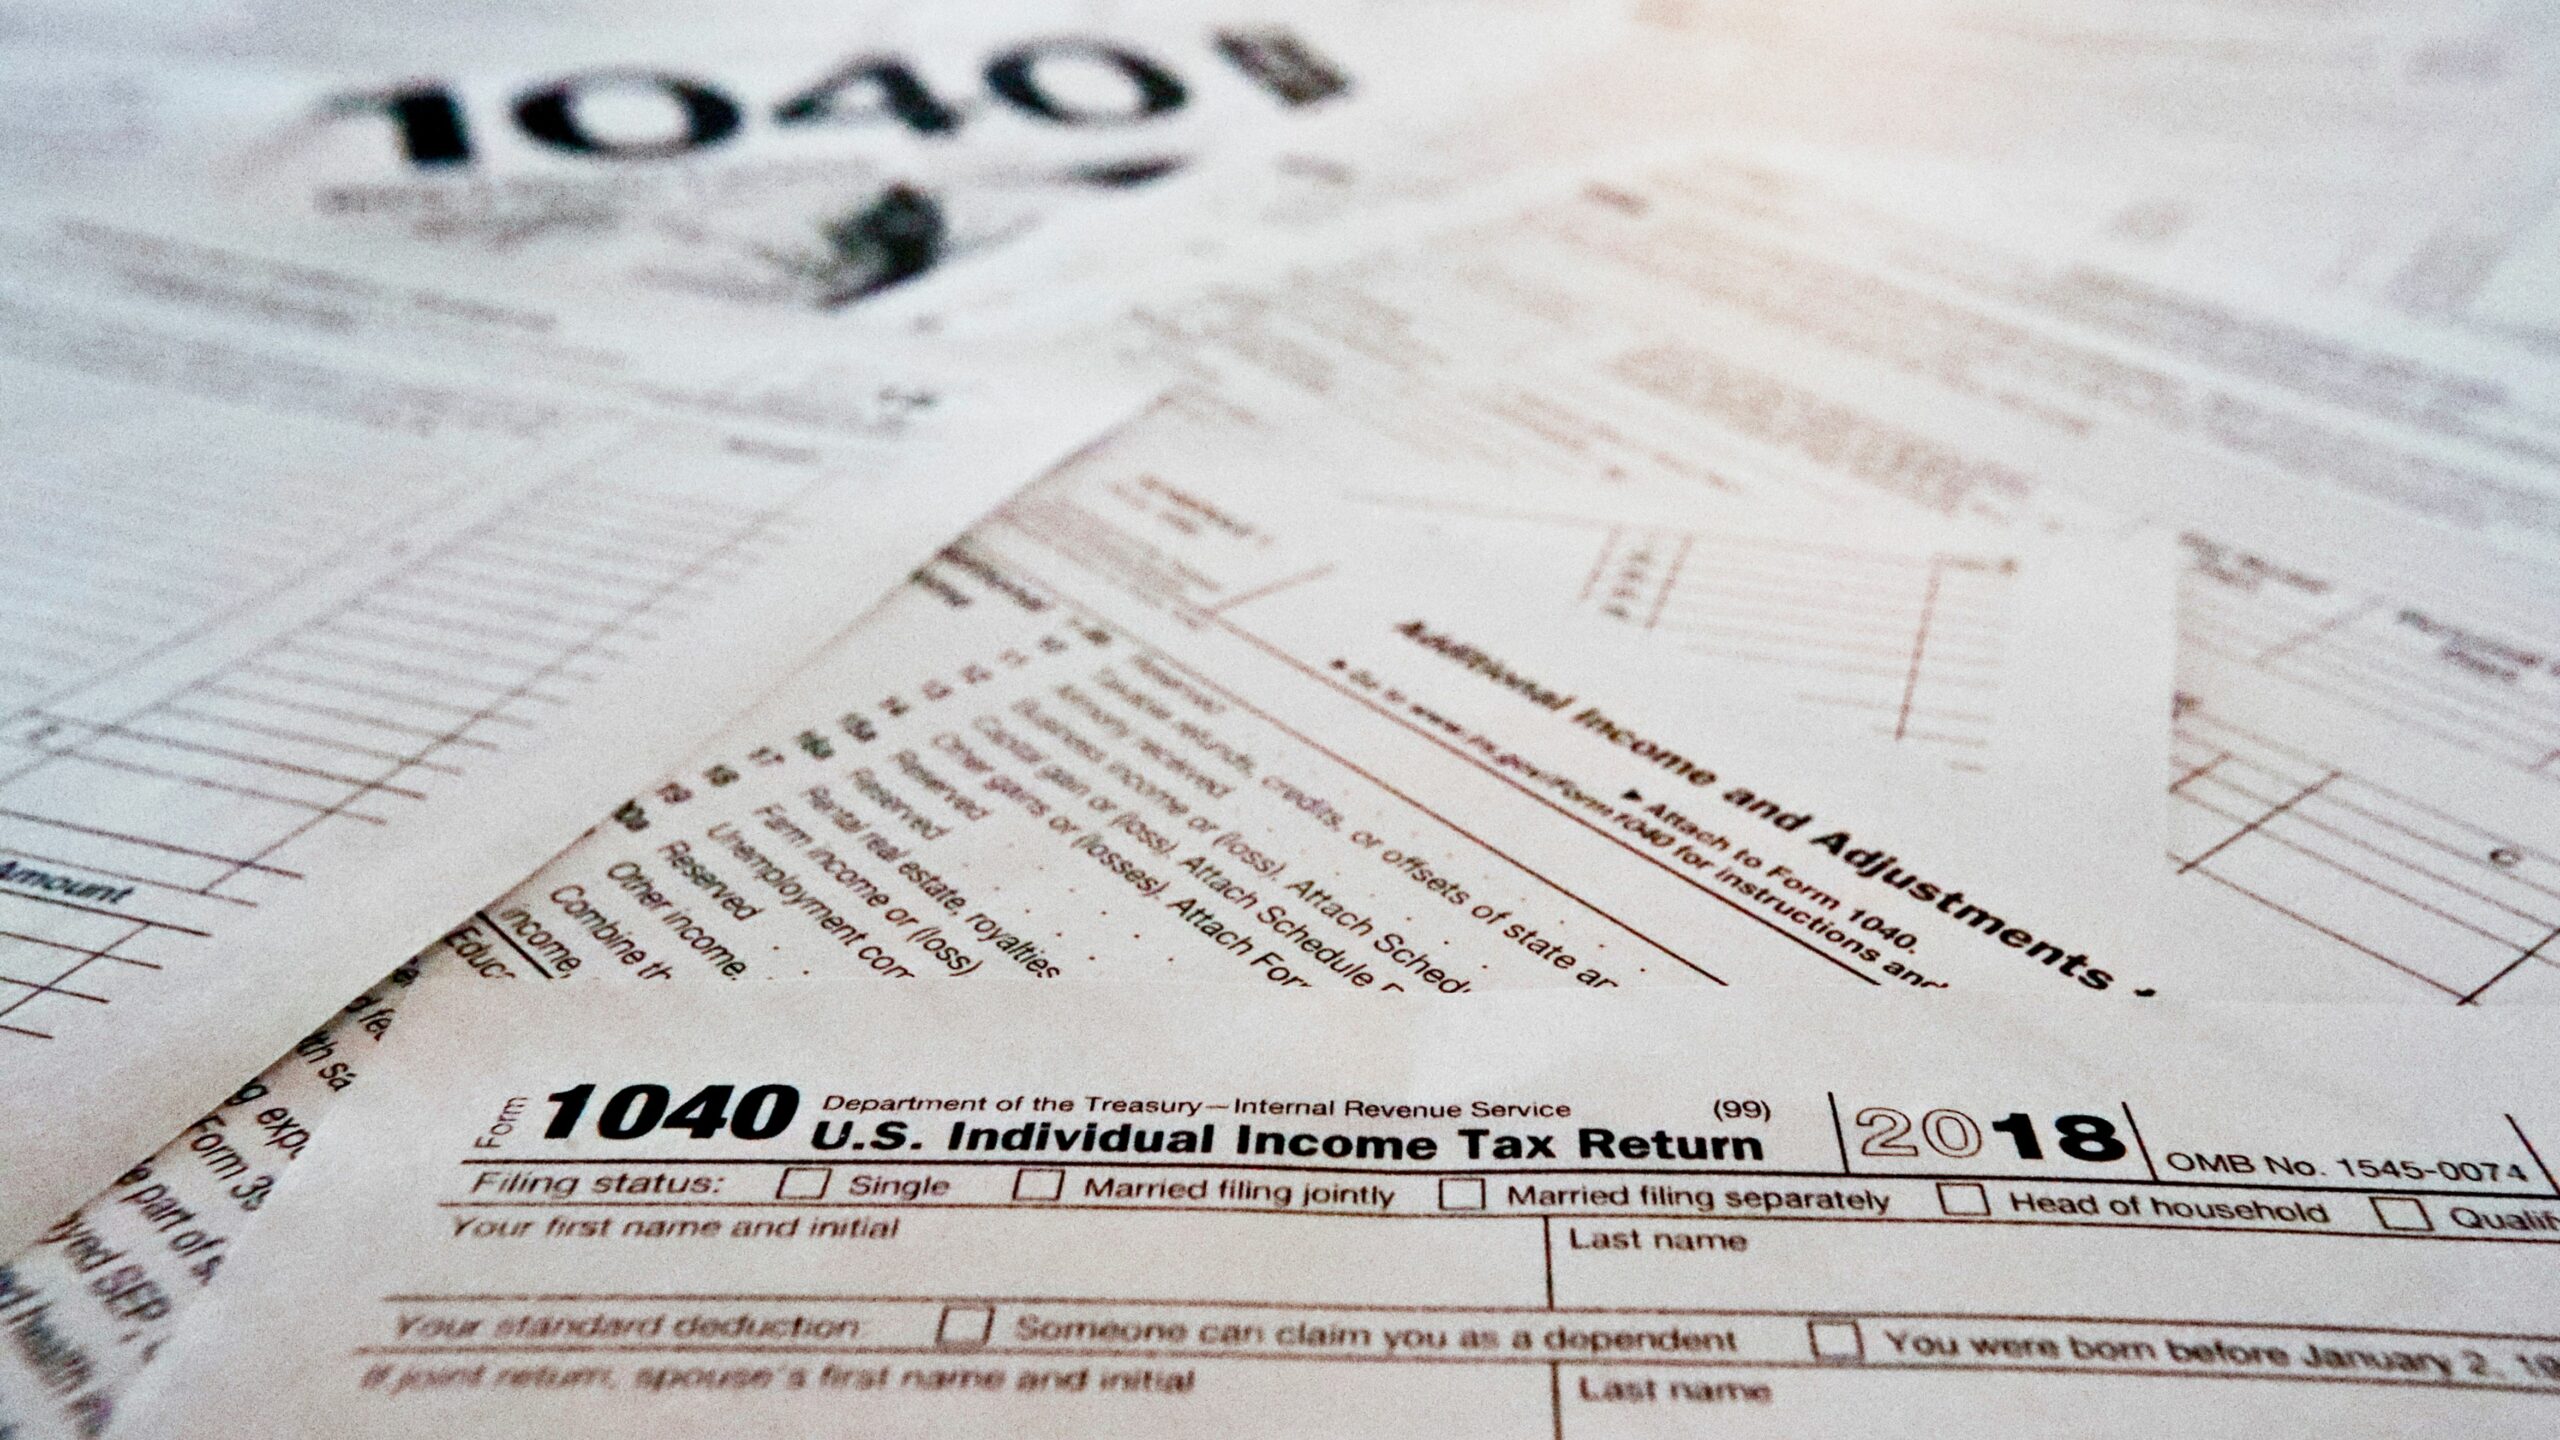 A New Jersey Lady Supported A Burglar In Stealing $565,000 In Tax Refund Cheques!